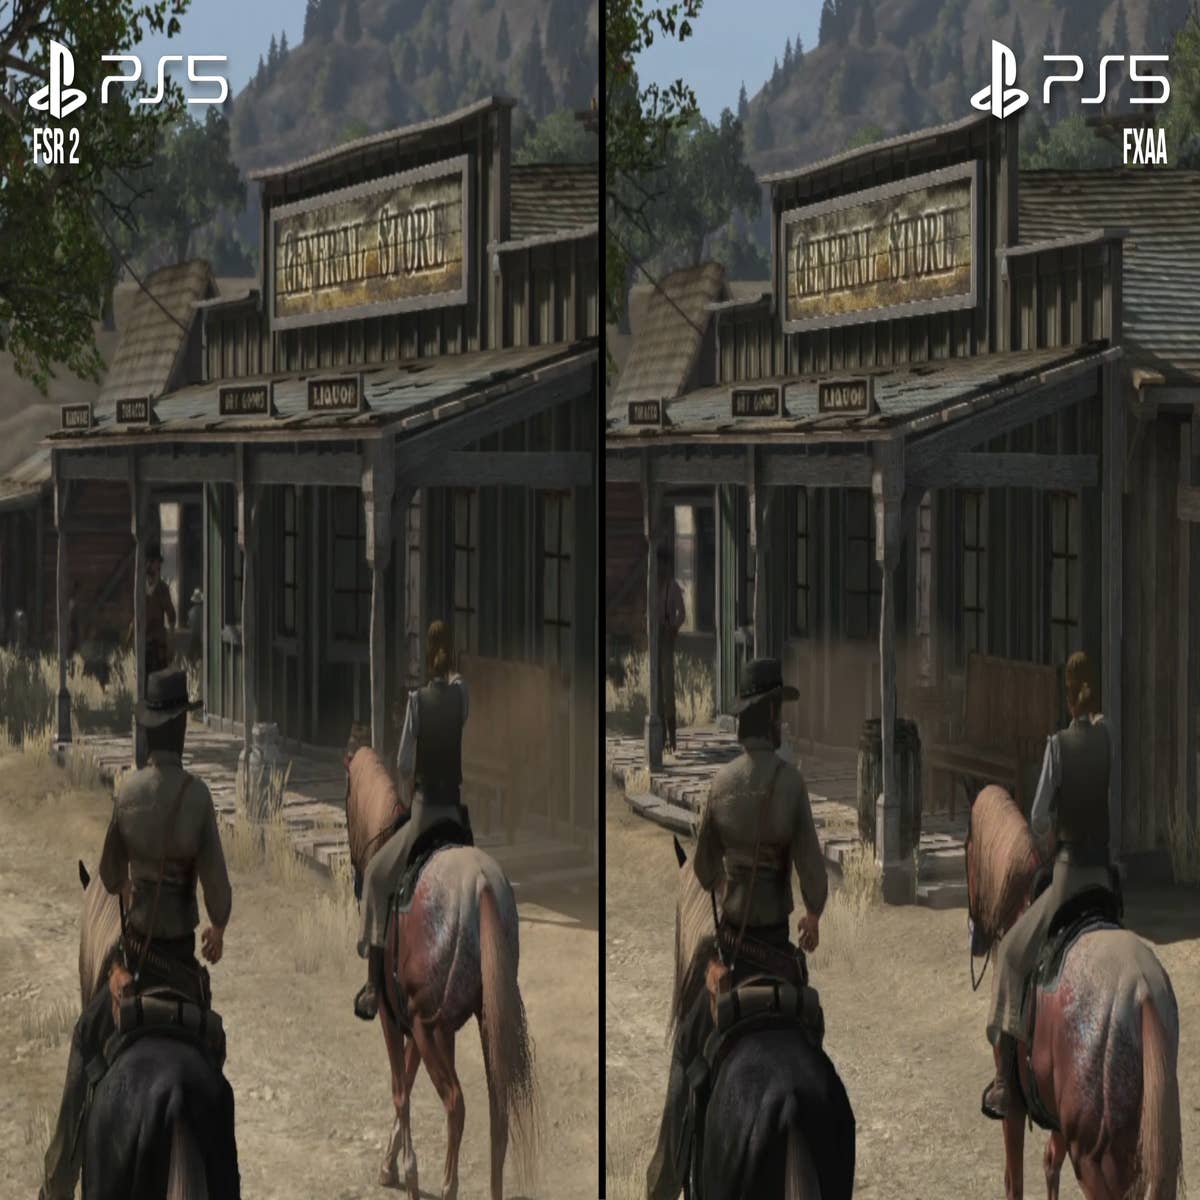 Red Dead Redemption on PlayStation has one impressive upgrade